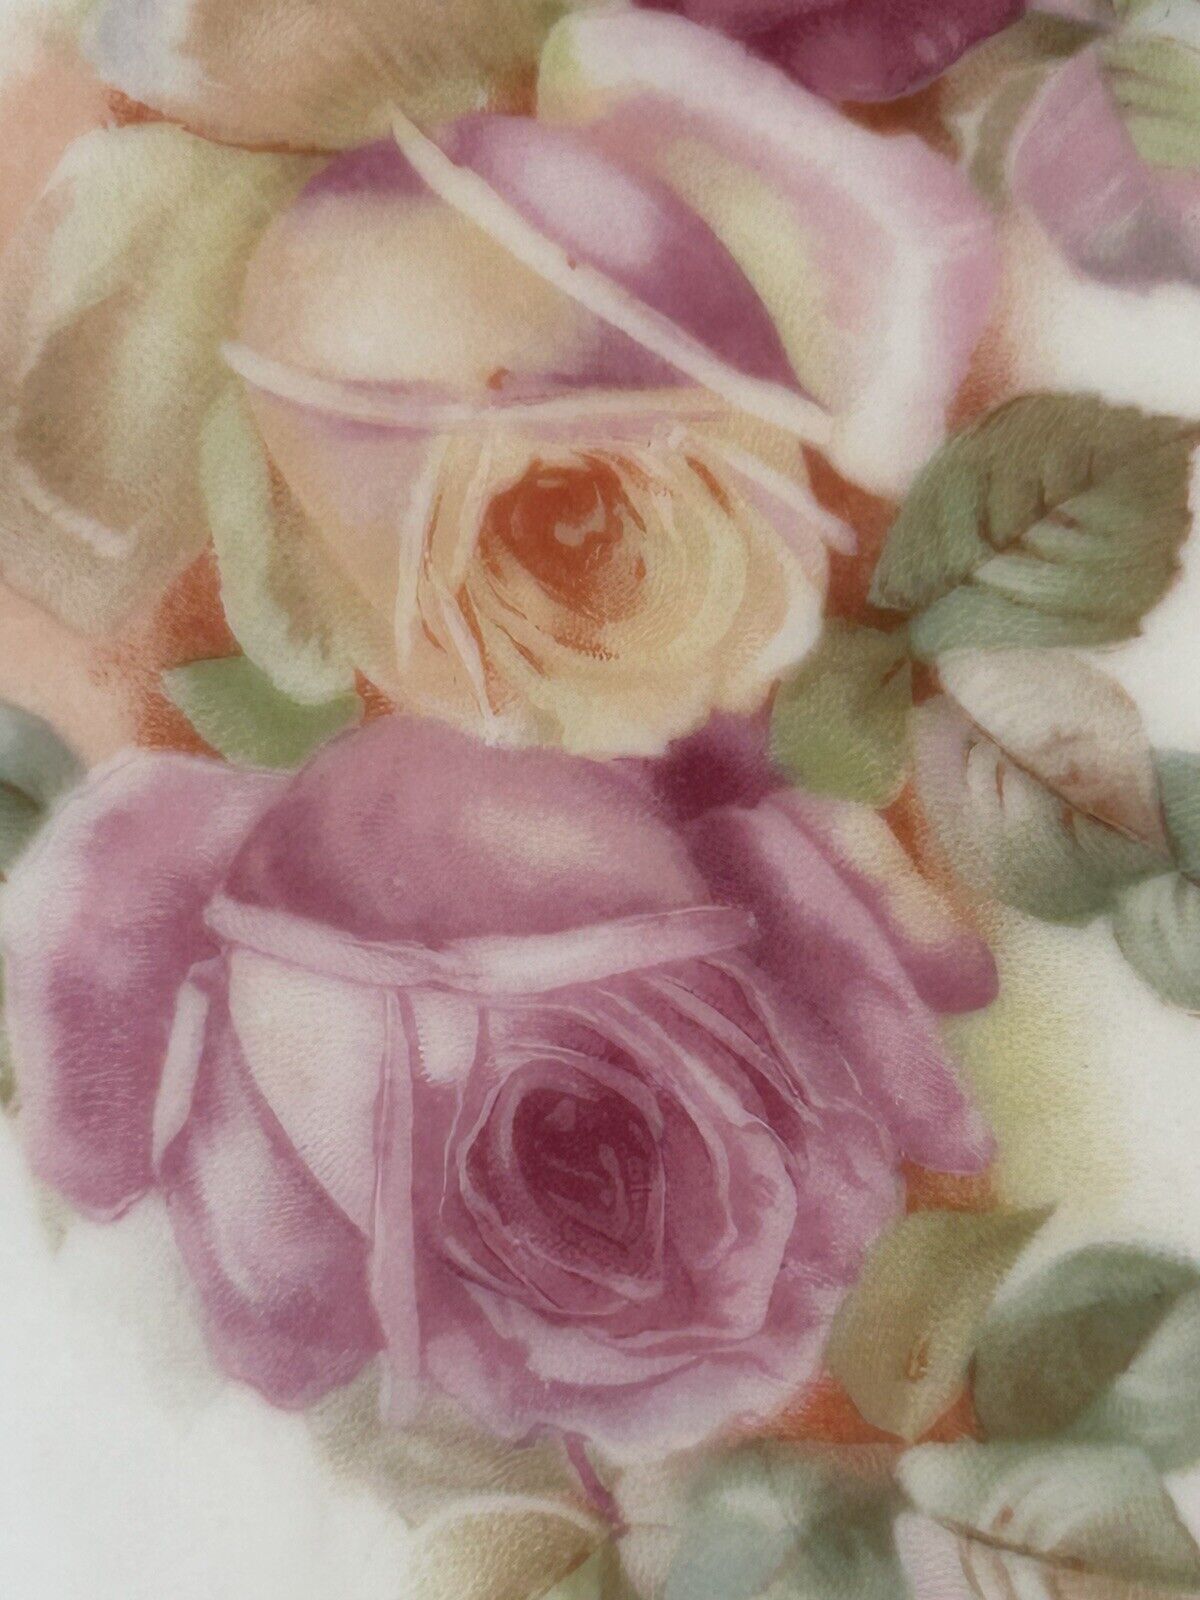 Vintage Silesia Germany 12” Victorian Hand Painted Porcelain Rose Platter